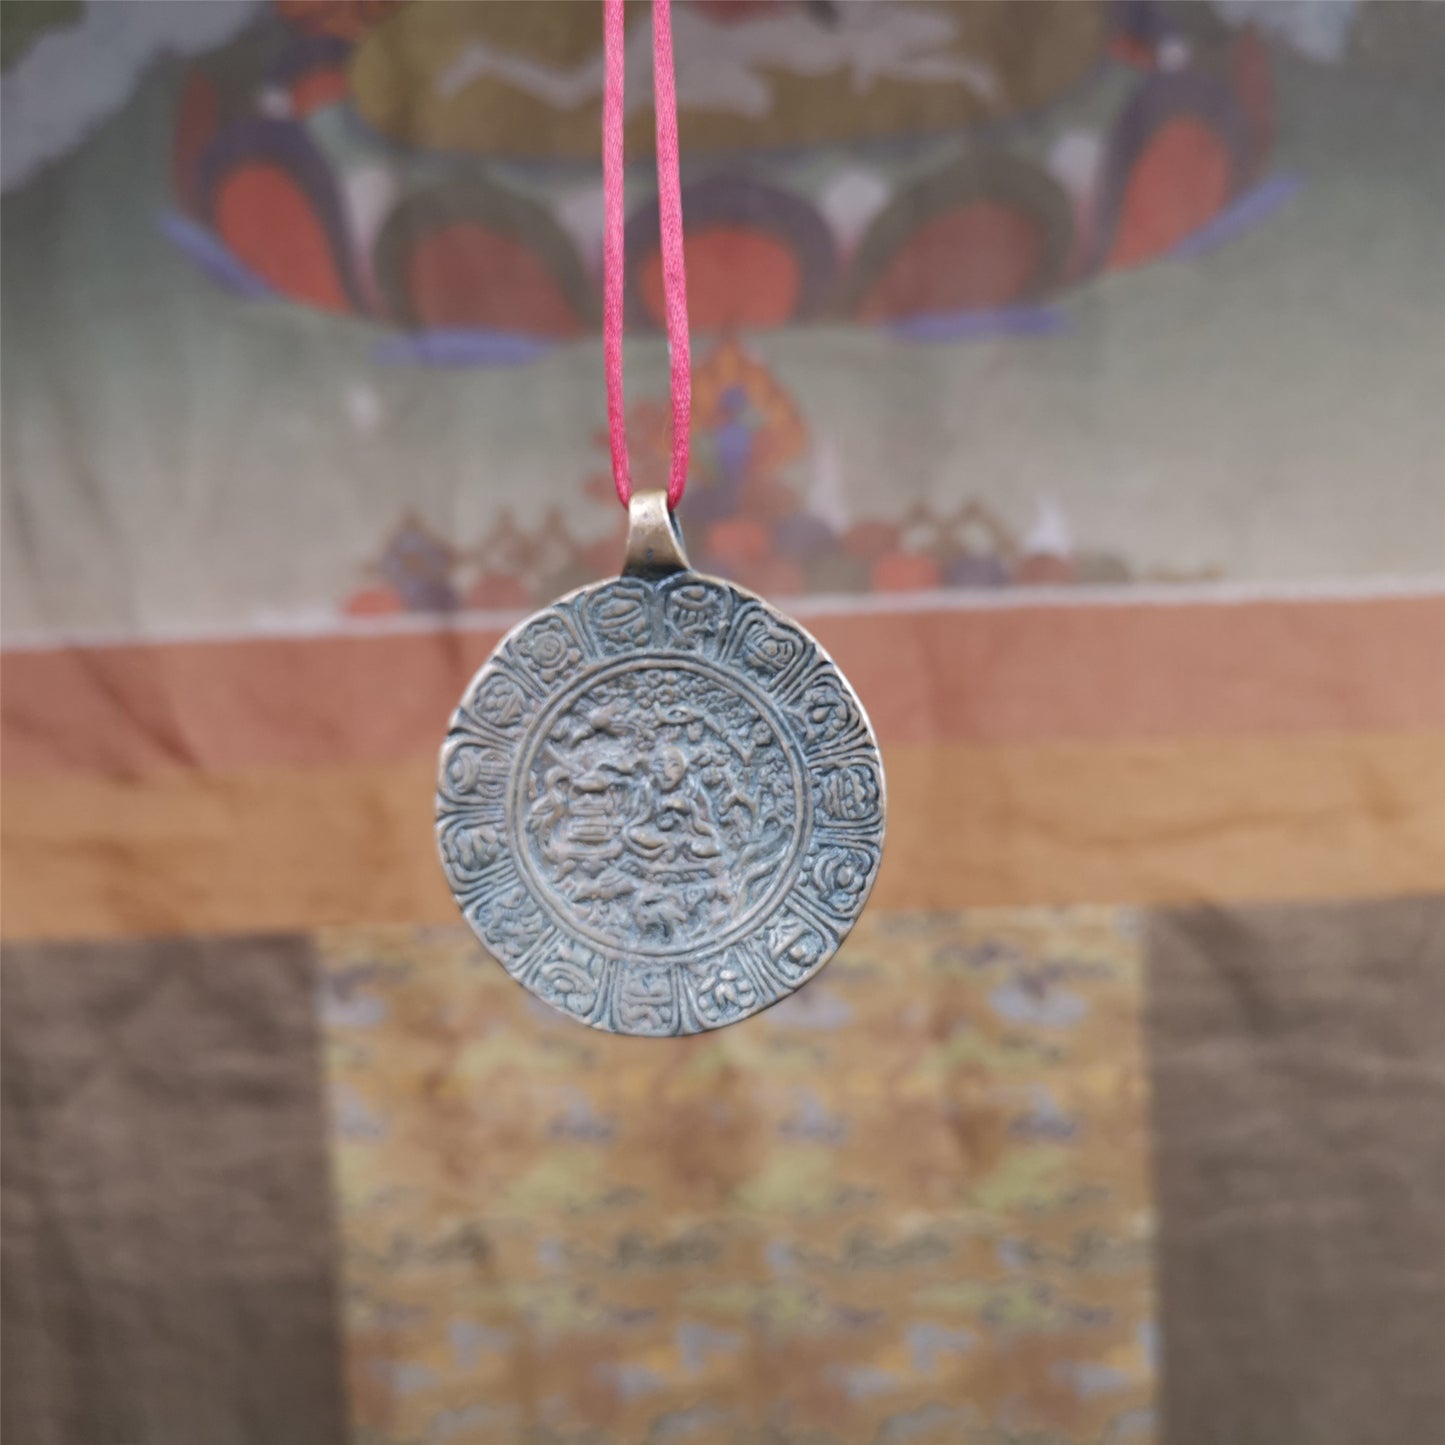 This old Longevity Badge was collected from Ganzi County Tibet about 100 years. It is made of copper,the theme is Shou-lao(the god of longevity) surrounded by the symbols of Ashtamangala. He is the ancient Chinese God of Longevity, represent Amitayus